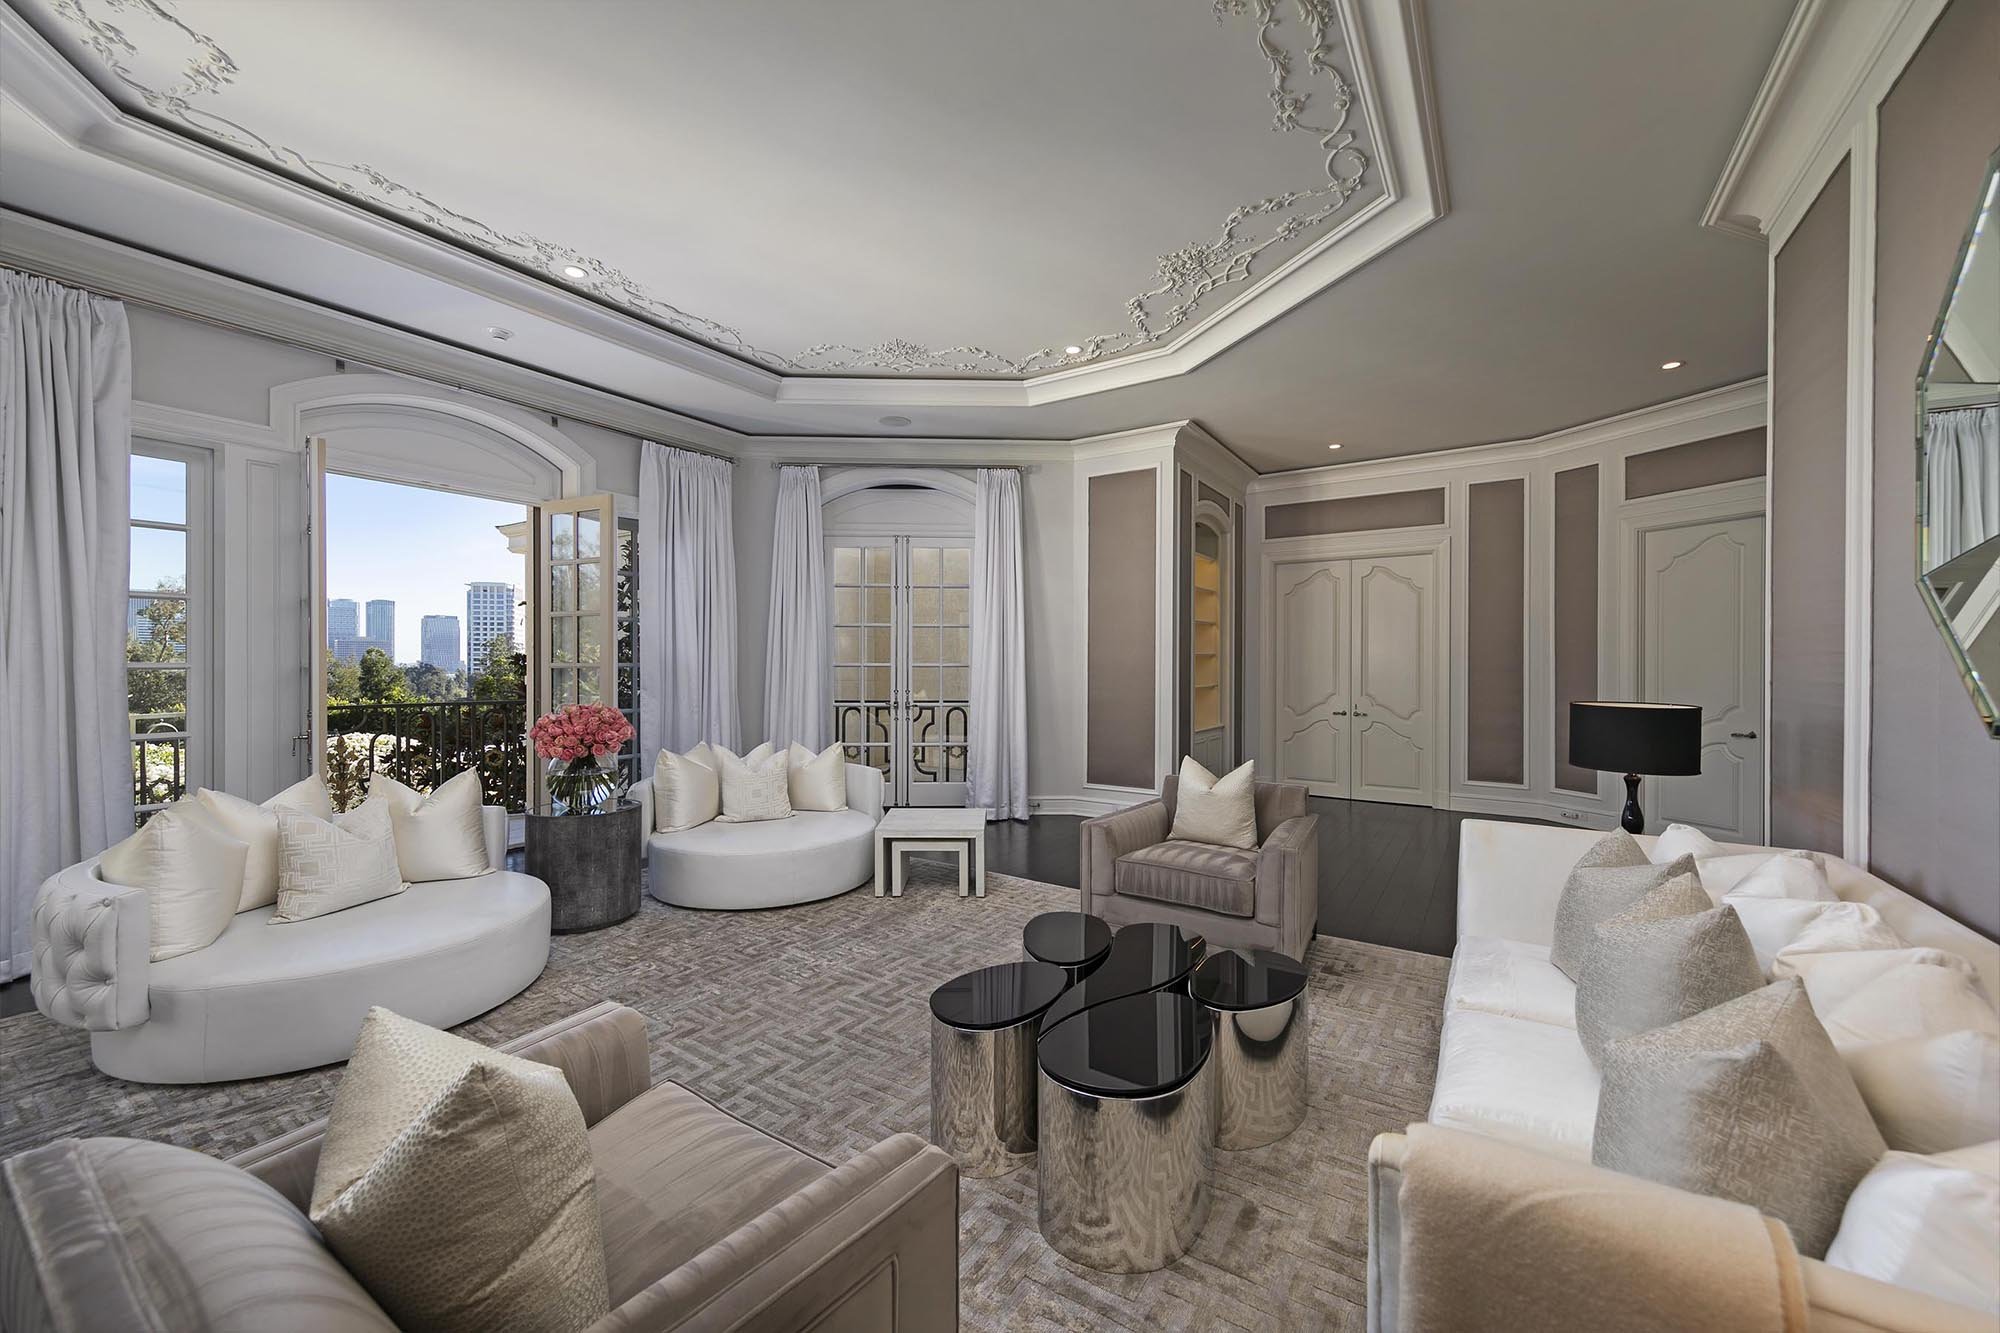 Francis York The 'Spelling Manor' is Back on the Market for $165M 18.jpg